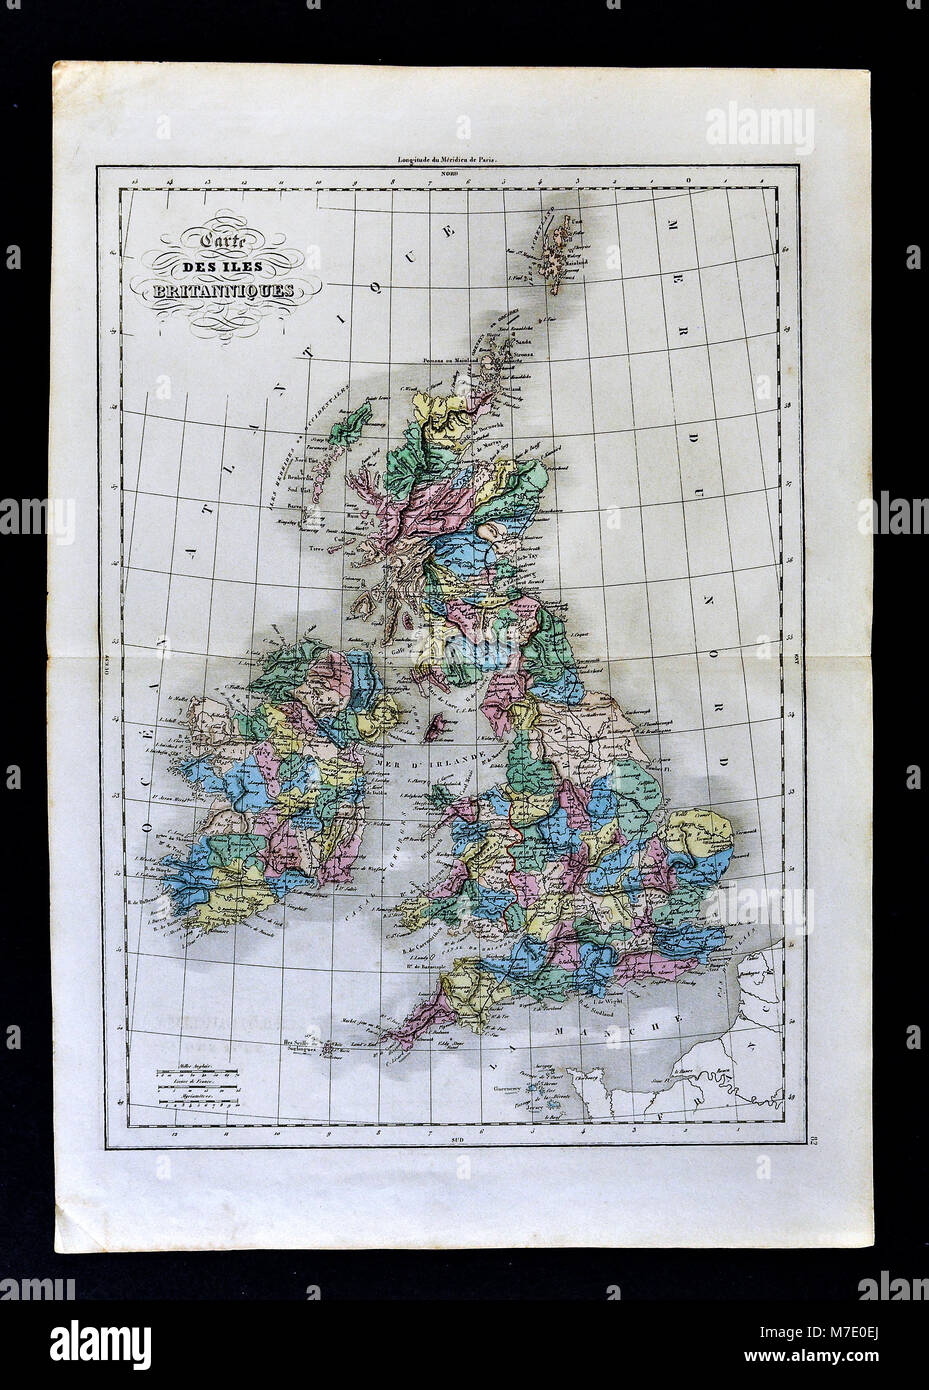 1858 Delamarche Historical Map of the British Isles showing England, Scotland, Wales and Ireland Stock Photo